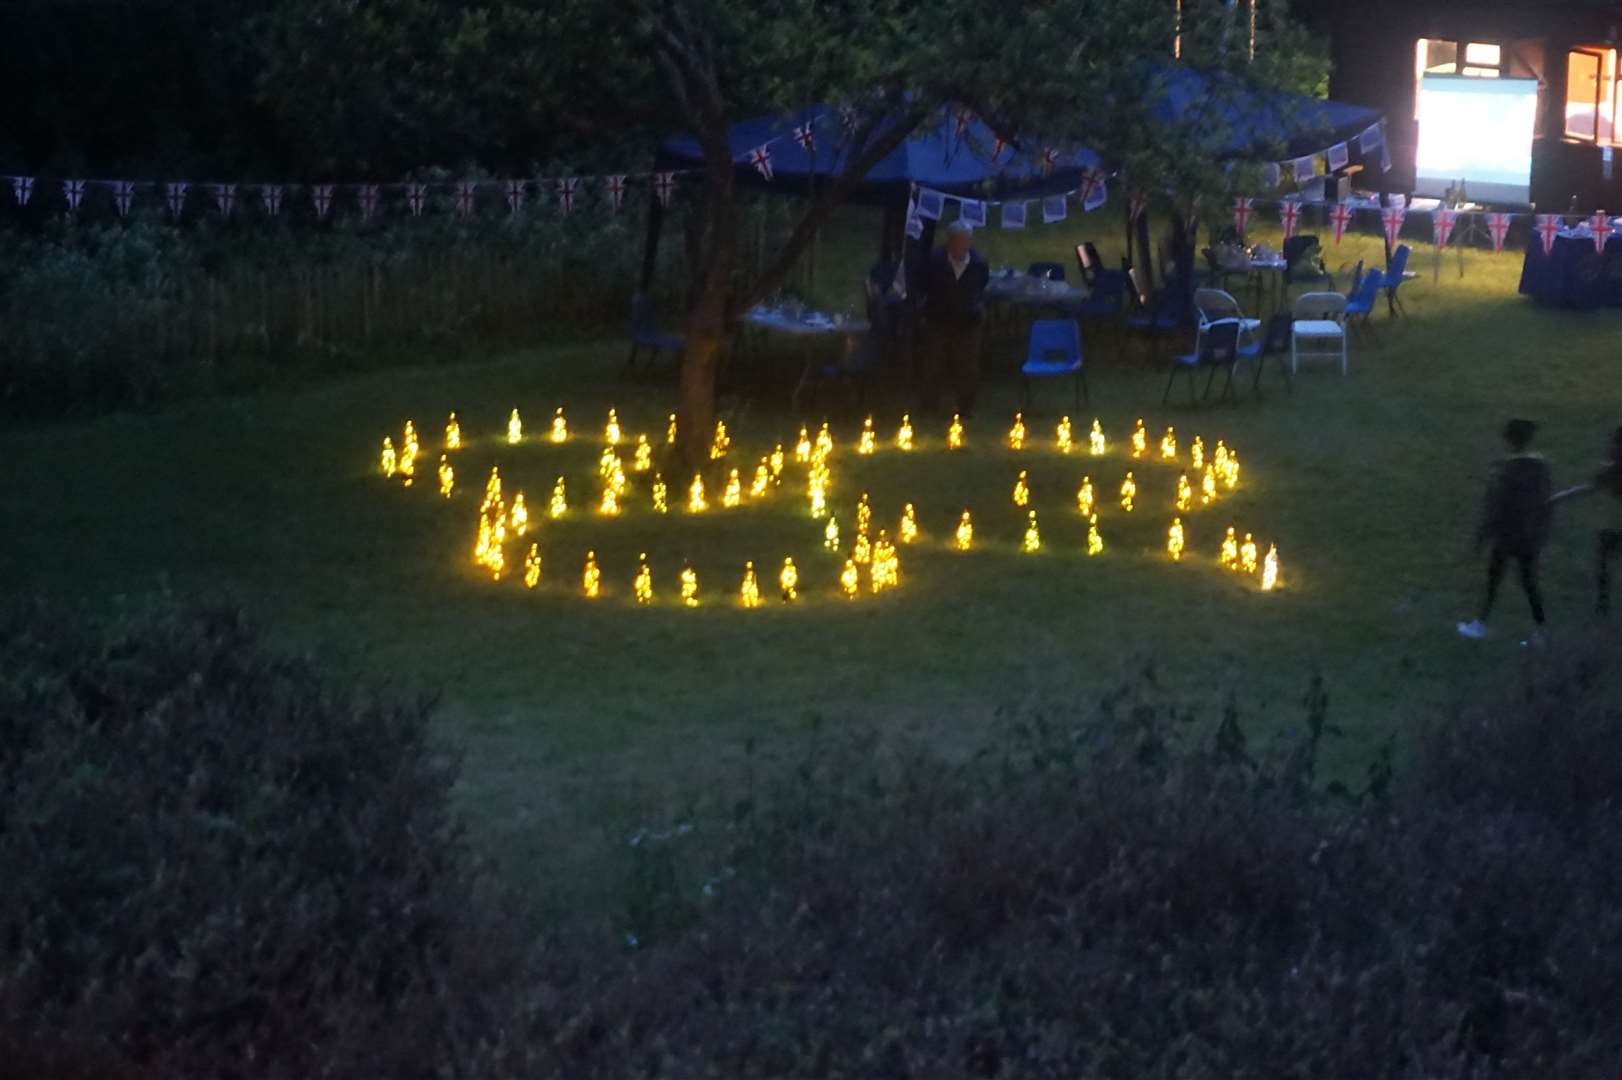 Girlguiding members across the UK lit 70 beacons, one for each year of the Queen's service. Girlguiding Kent West were chosen to light one of the beacons and this took place at Pax Wood, Wilmington. Divisions from across the county including Dartford, Gravesend and Medway joined together to light up a Guiding Trefoil